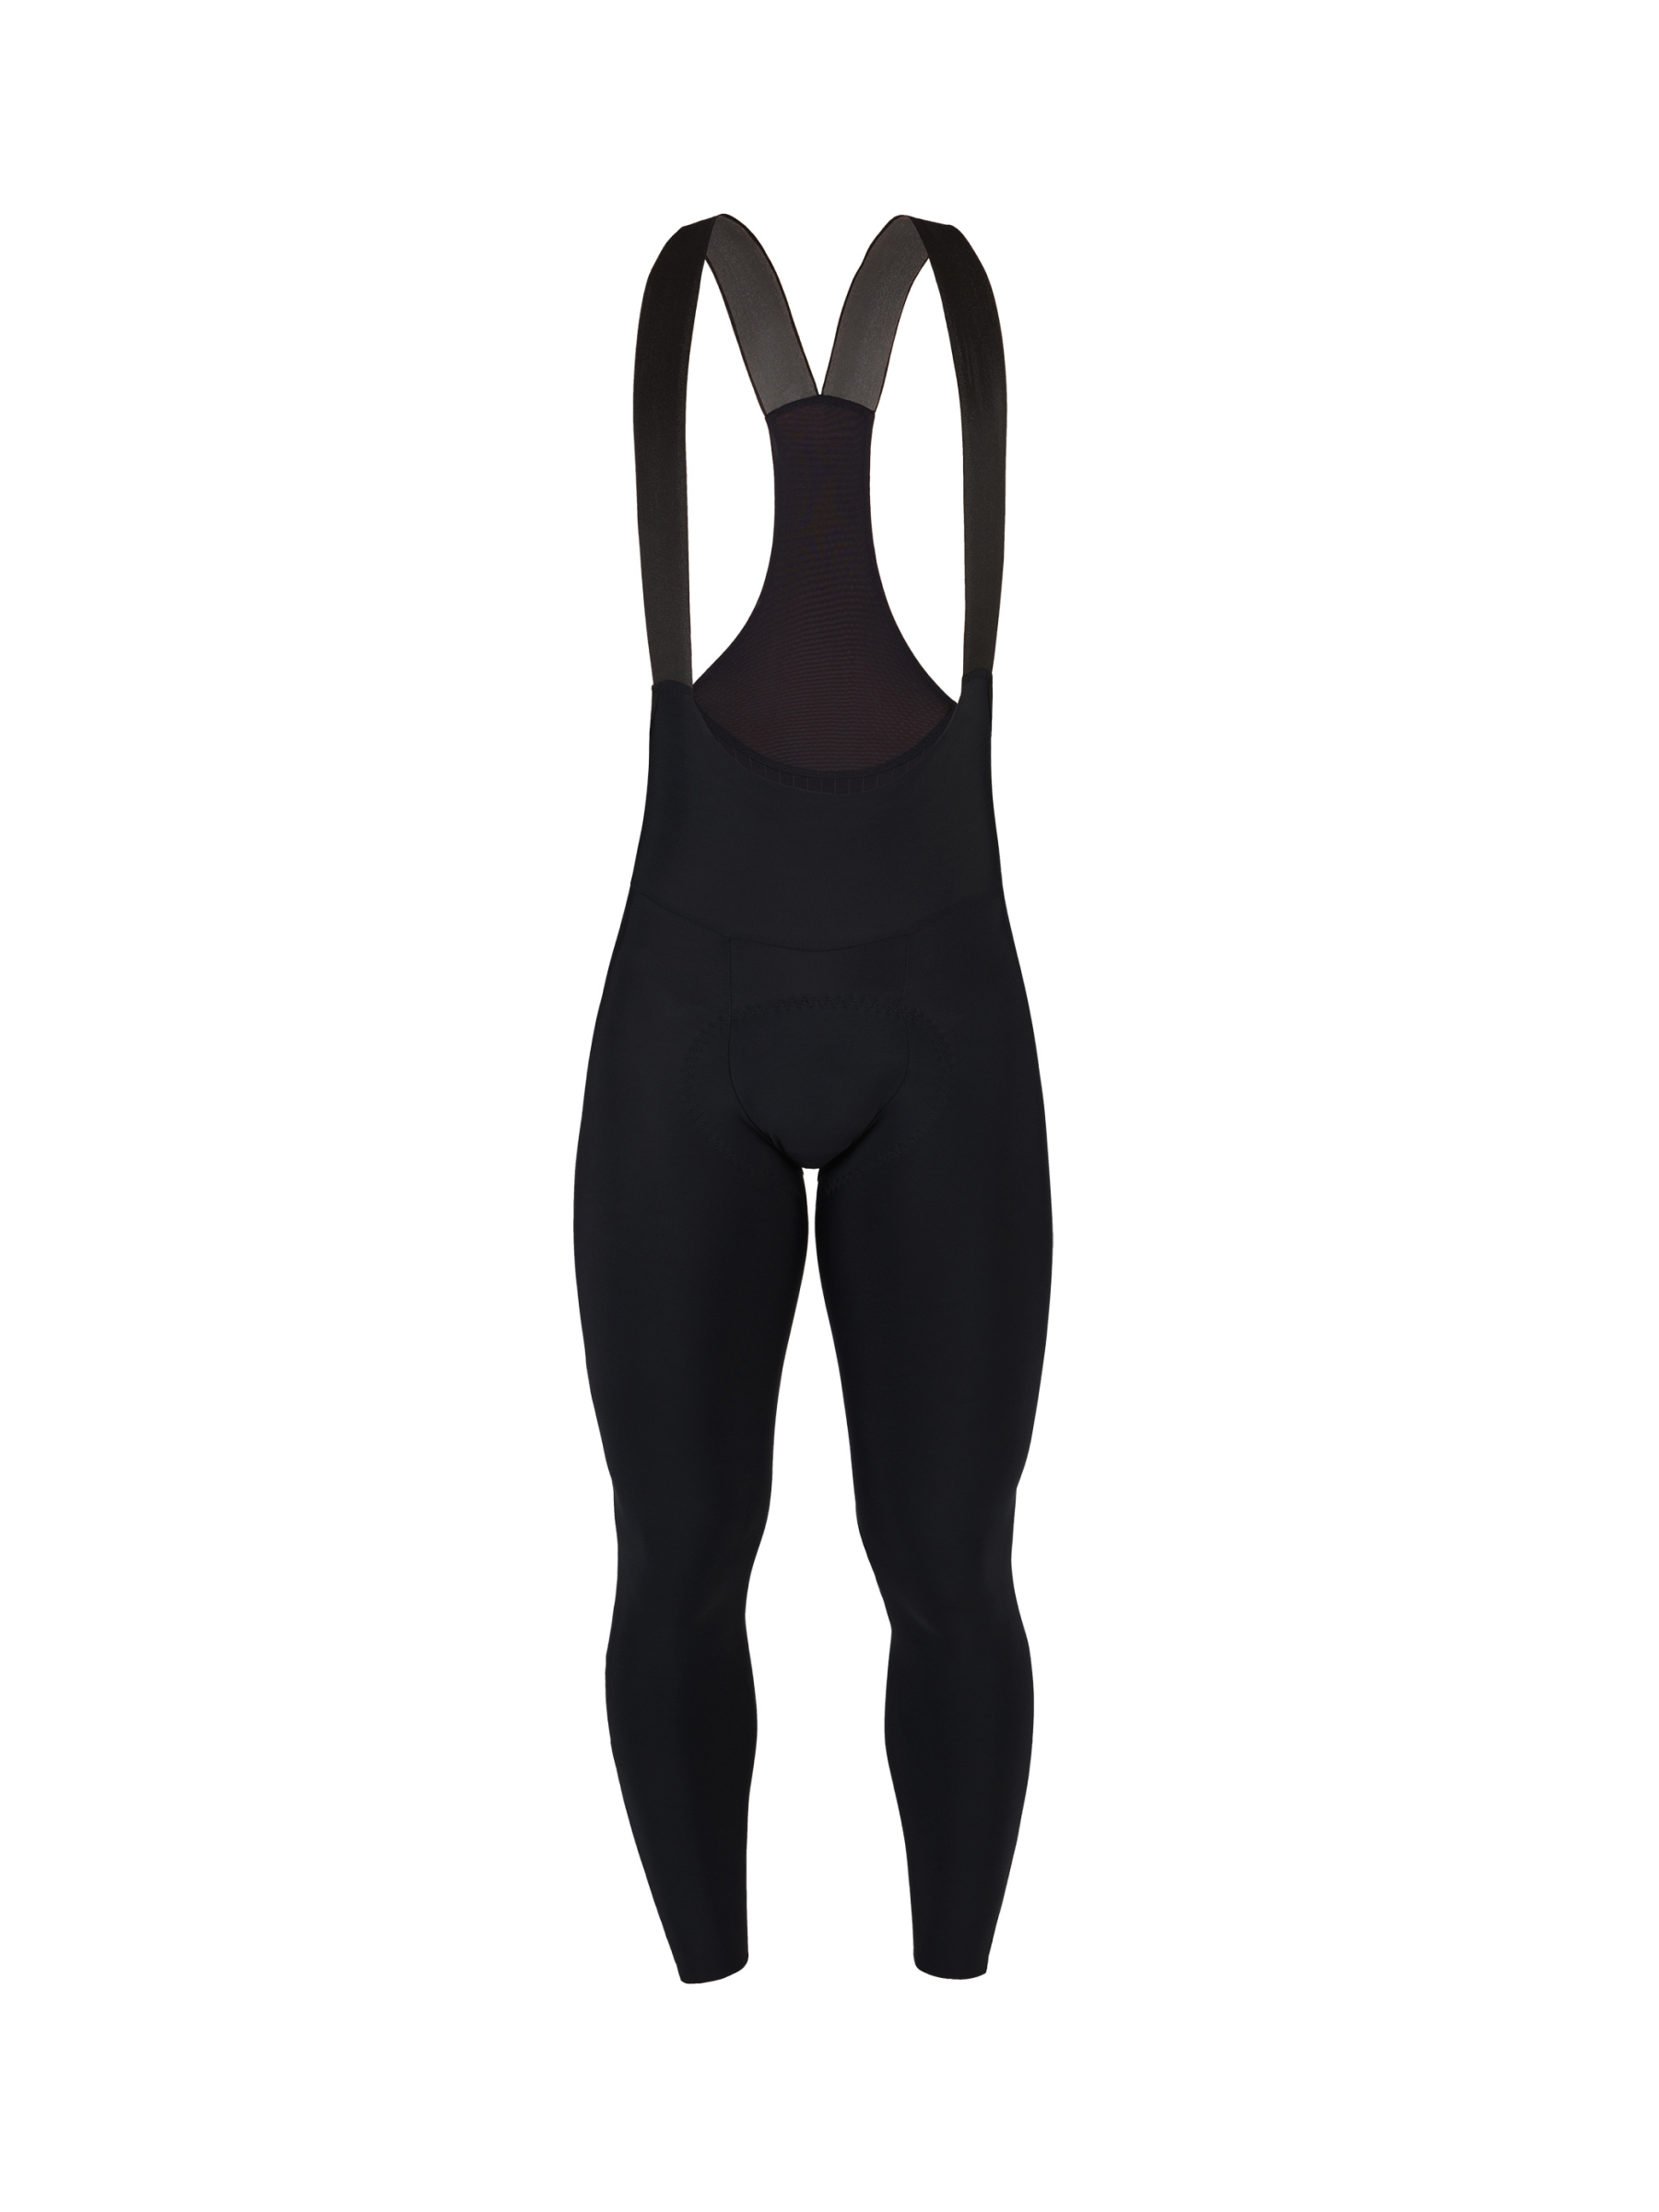 Pro Resistance Tights for Women - Olympic Blue